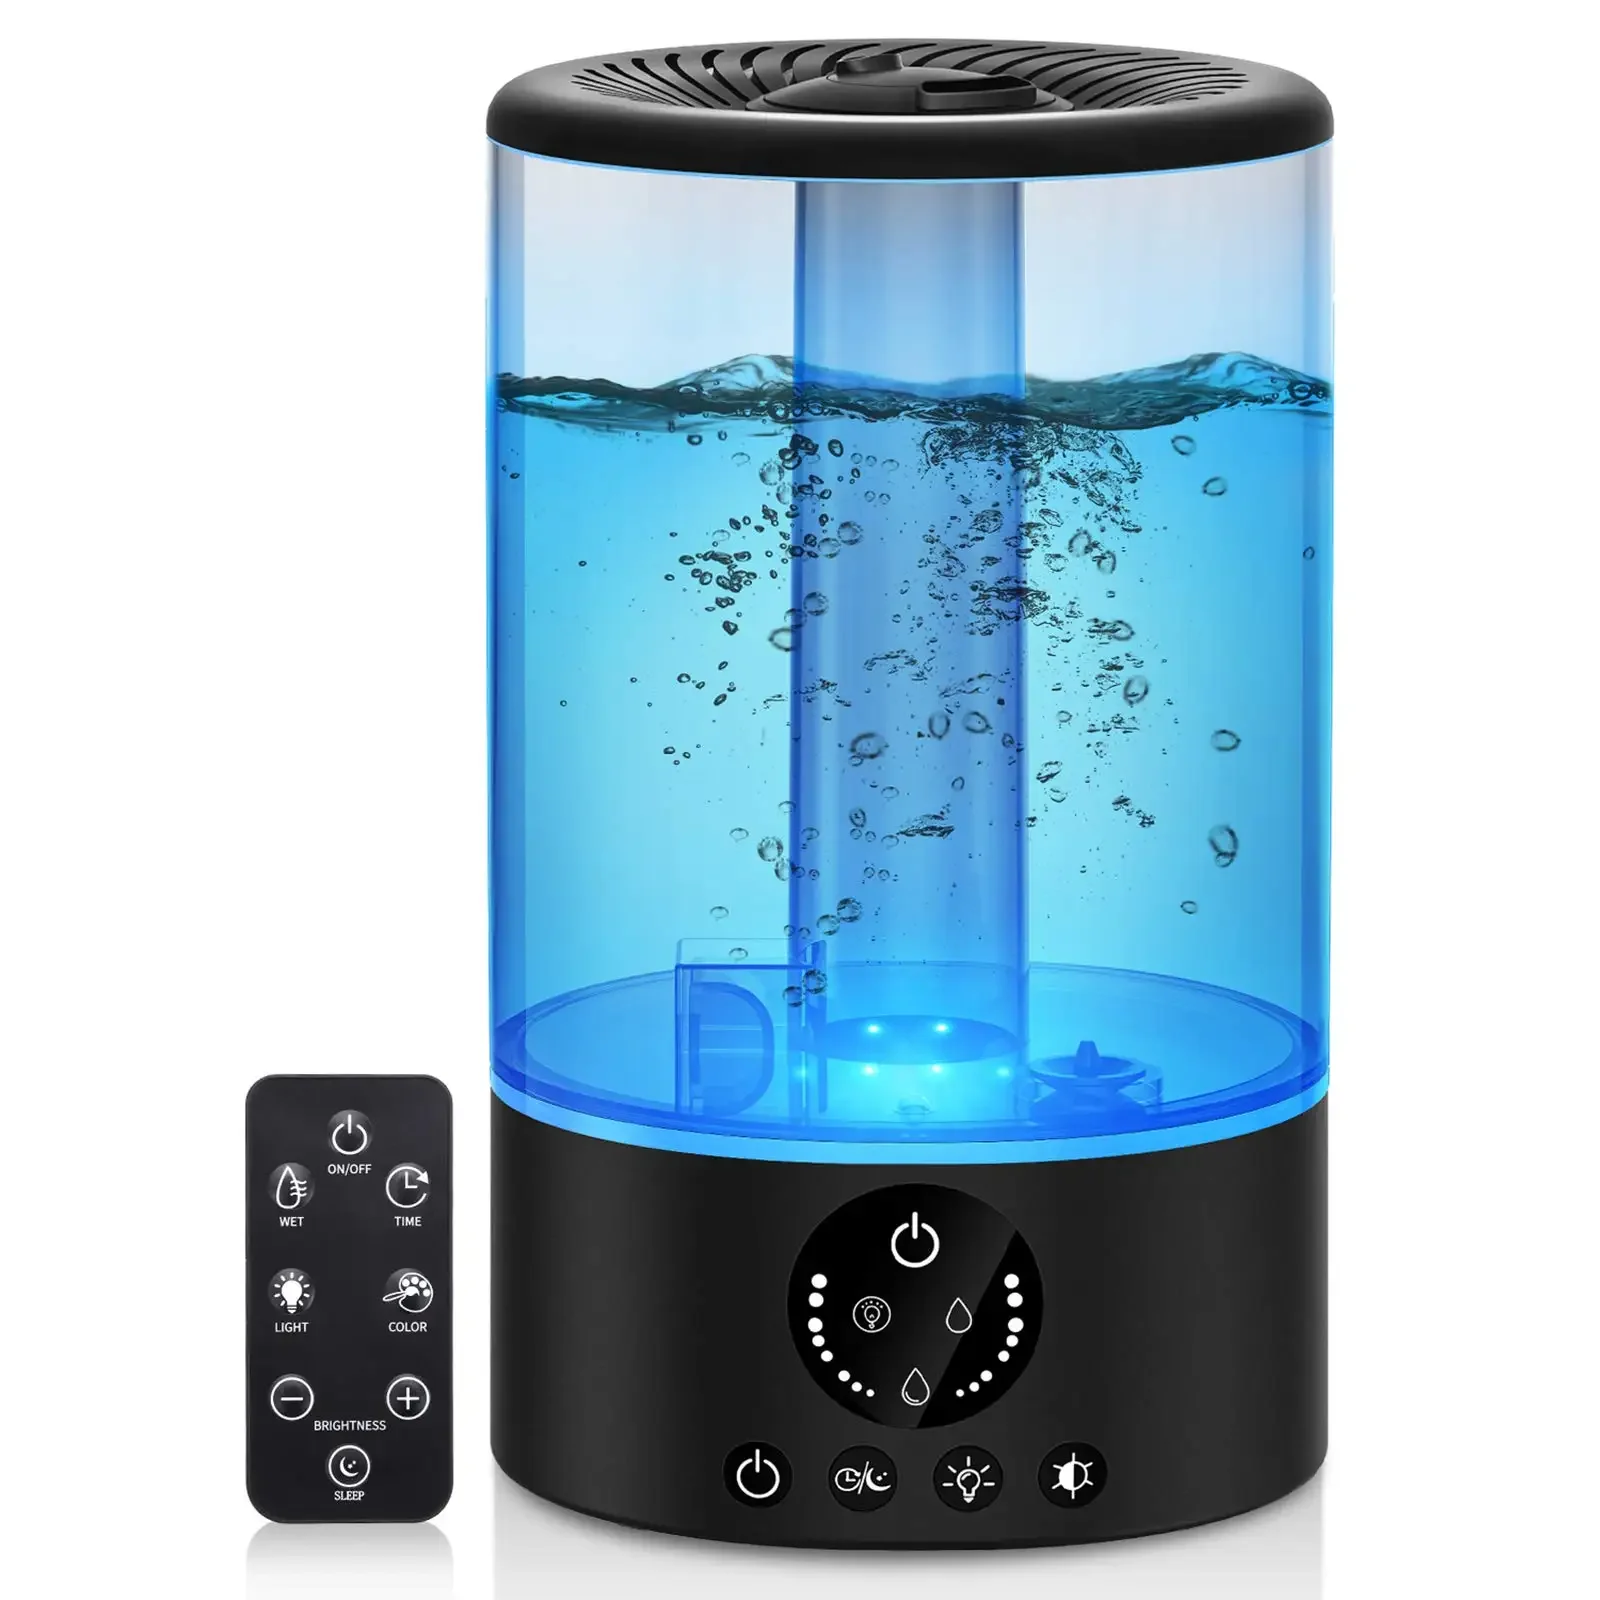 Cool Mist Humidifier, Ultrasonic Humidifiers for Bedroom Baby, 3L Large Humidifier w/ Remote Control, 7 Colors Night Light 6 Dim dreams cool mist ultrasonic humidifier vul575 bedroom jellyfish mushroom humidifier essential oil diffuser oil diffuser essenti